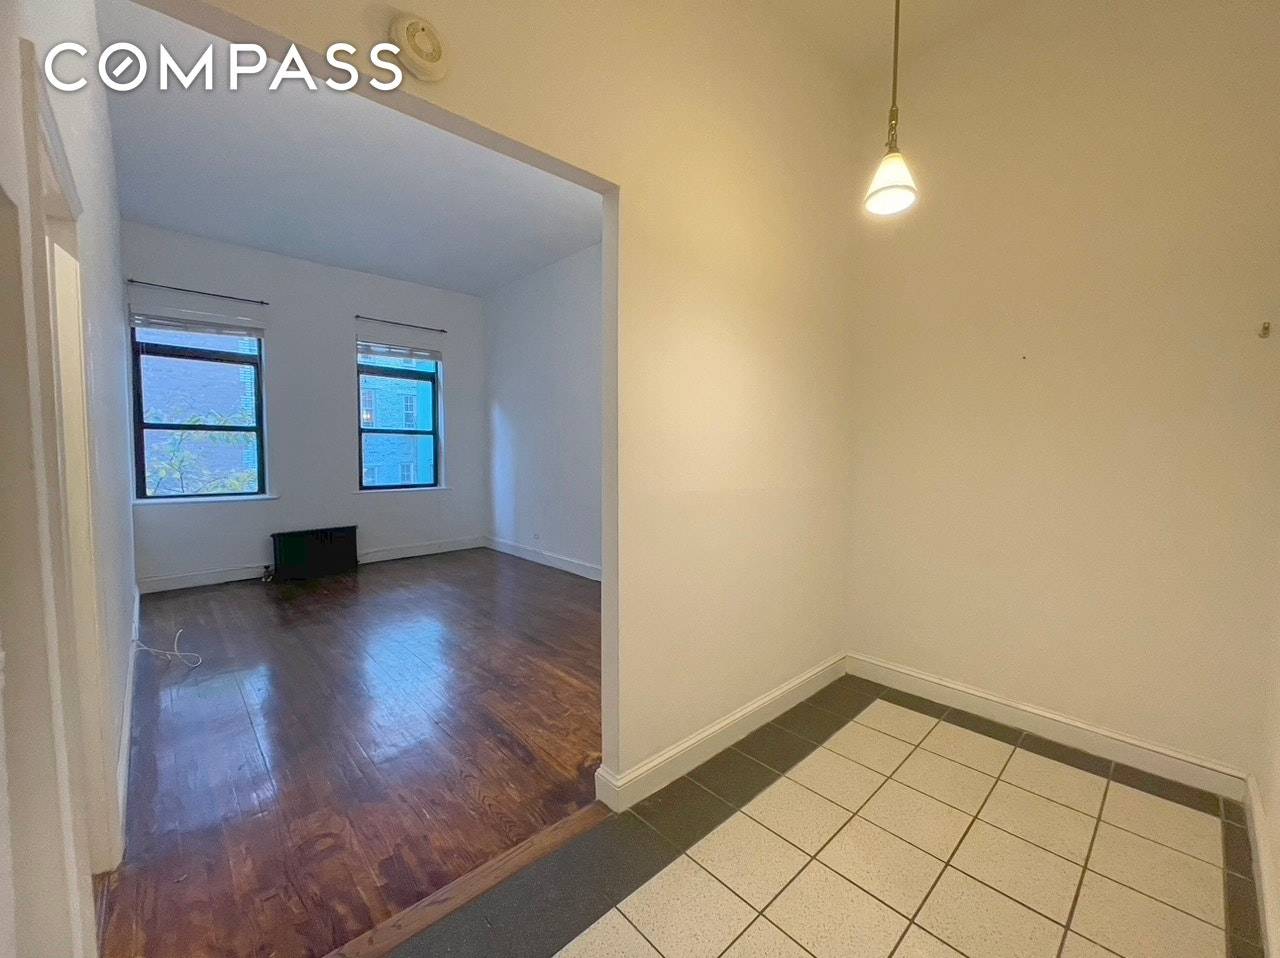 Lovely 1 bedroom on Jane St between Hudson and 8th Ave, in the heart of the West Village.